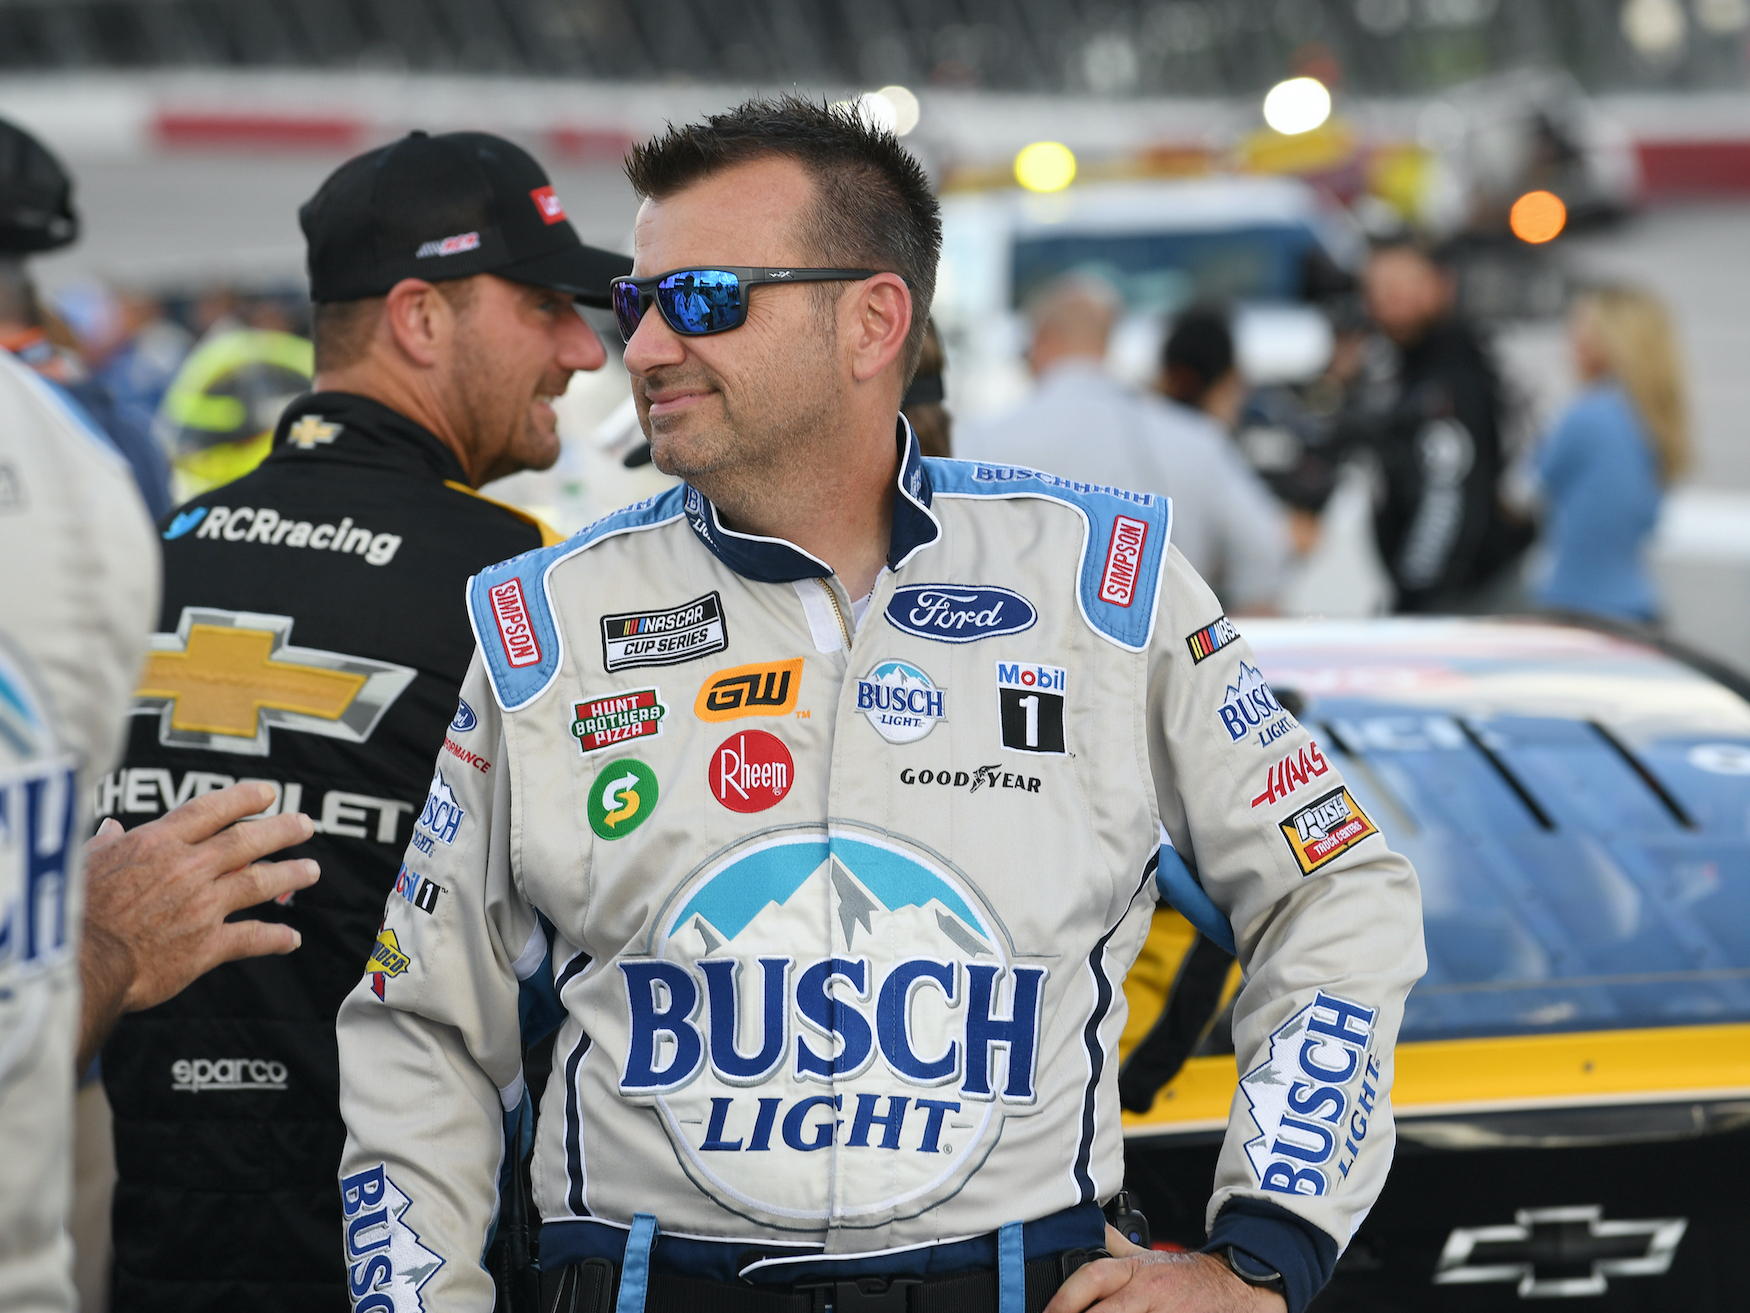 Kevin Harvick’s Crew Chief Rodney Childers Talks About Bad Hits and Why 1 Crash at Texas Made Him Want to Throw Up, and It’s Not Alex Bowman